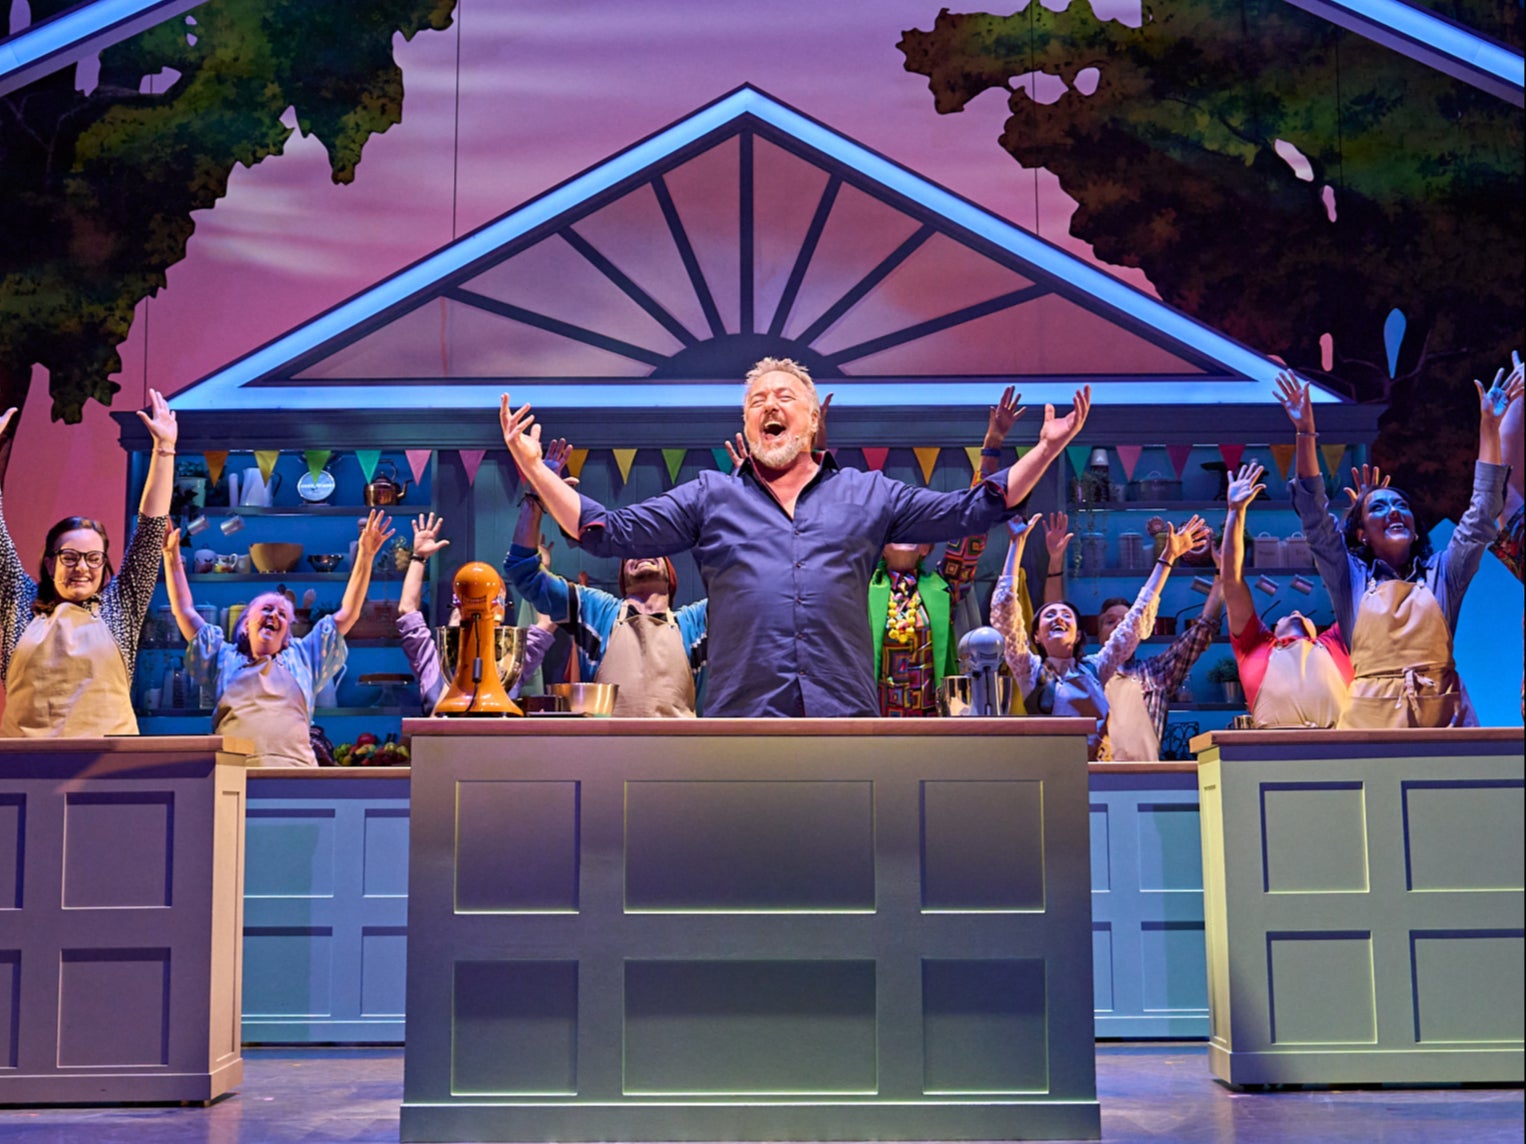 John Owen-Jones as Phil Hollinghurst and the cast of ‘The Great British Bake Off Musical’